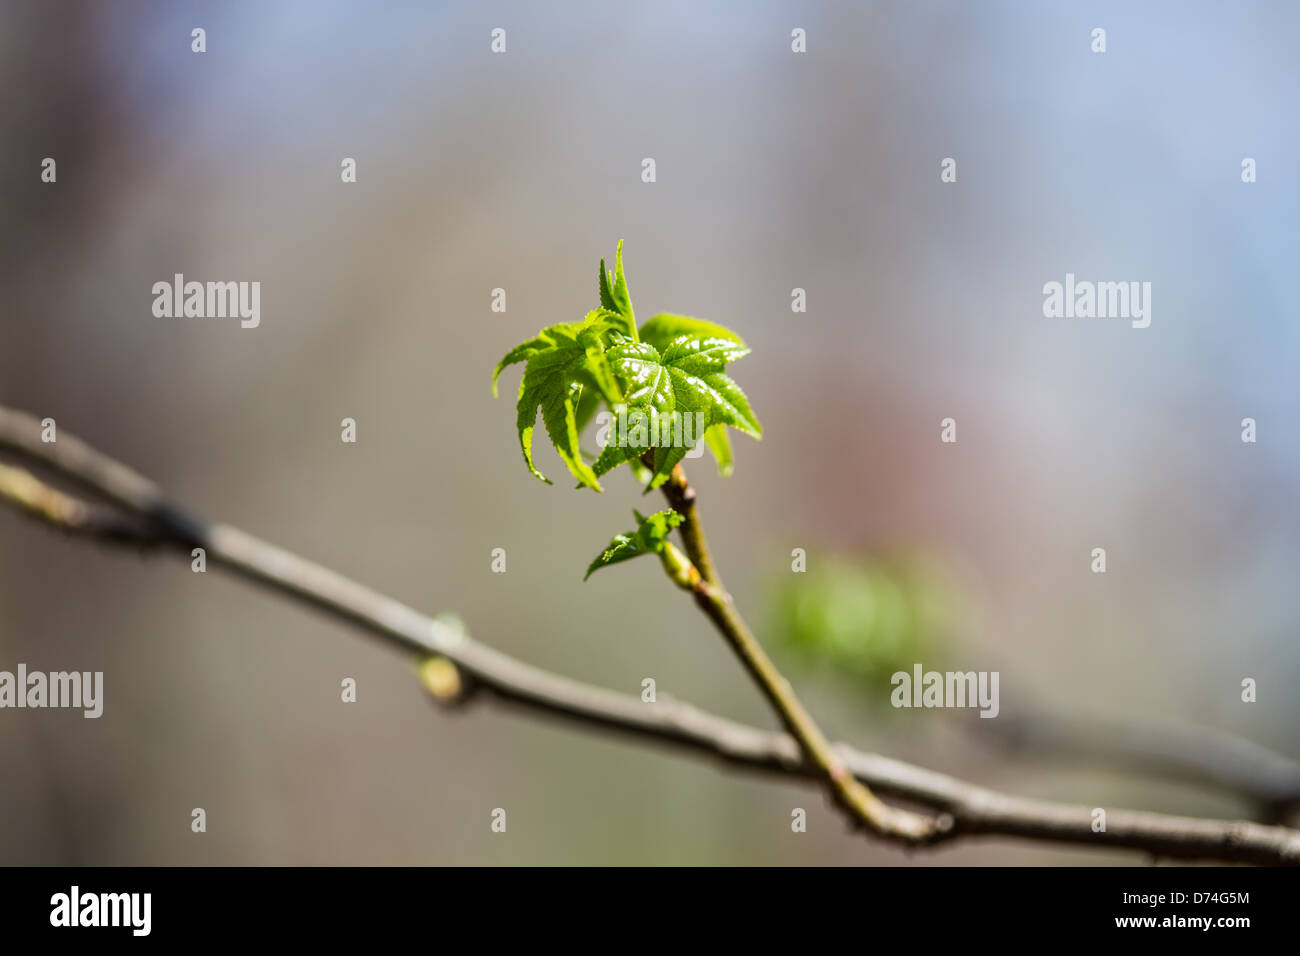 Maple trees sprout their first leaves of a new spring season. Stock Photo